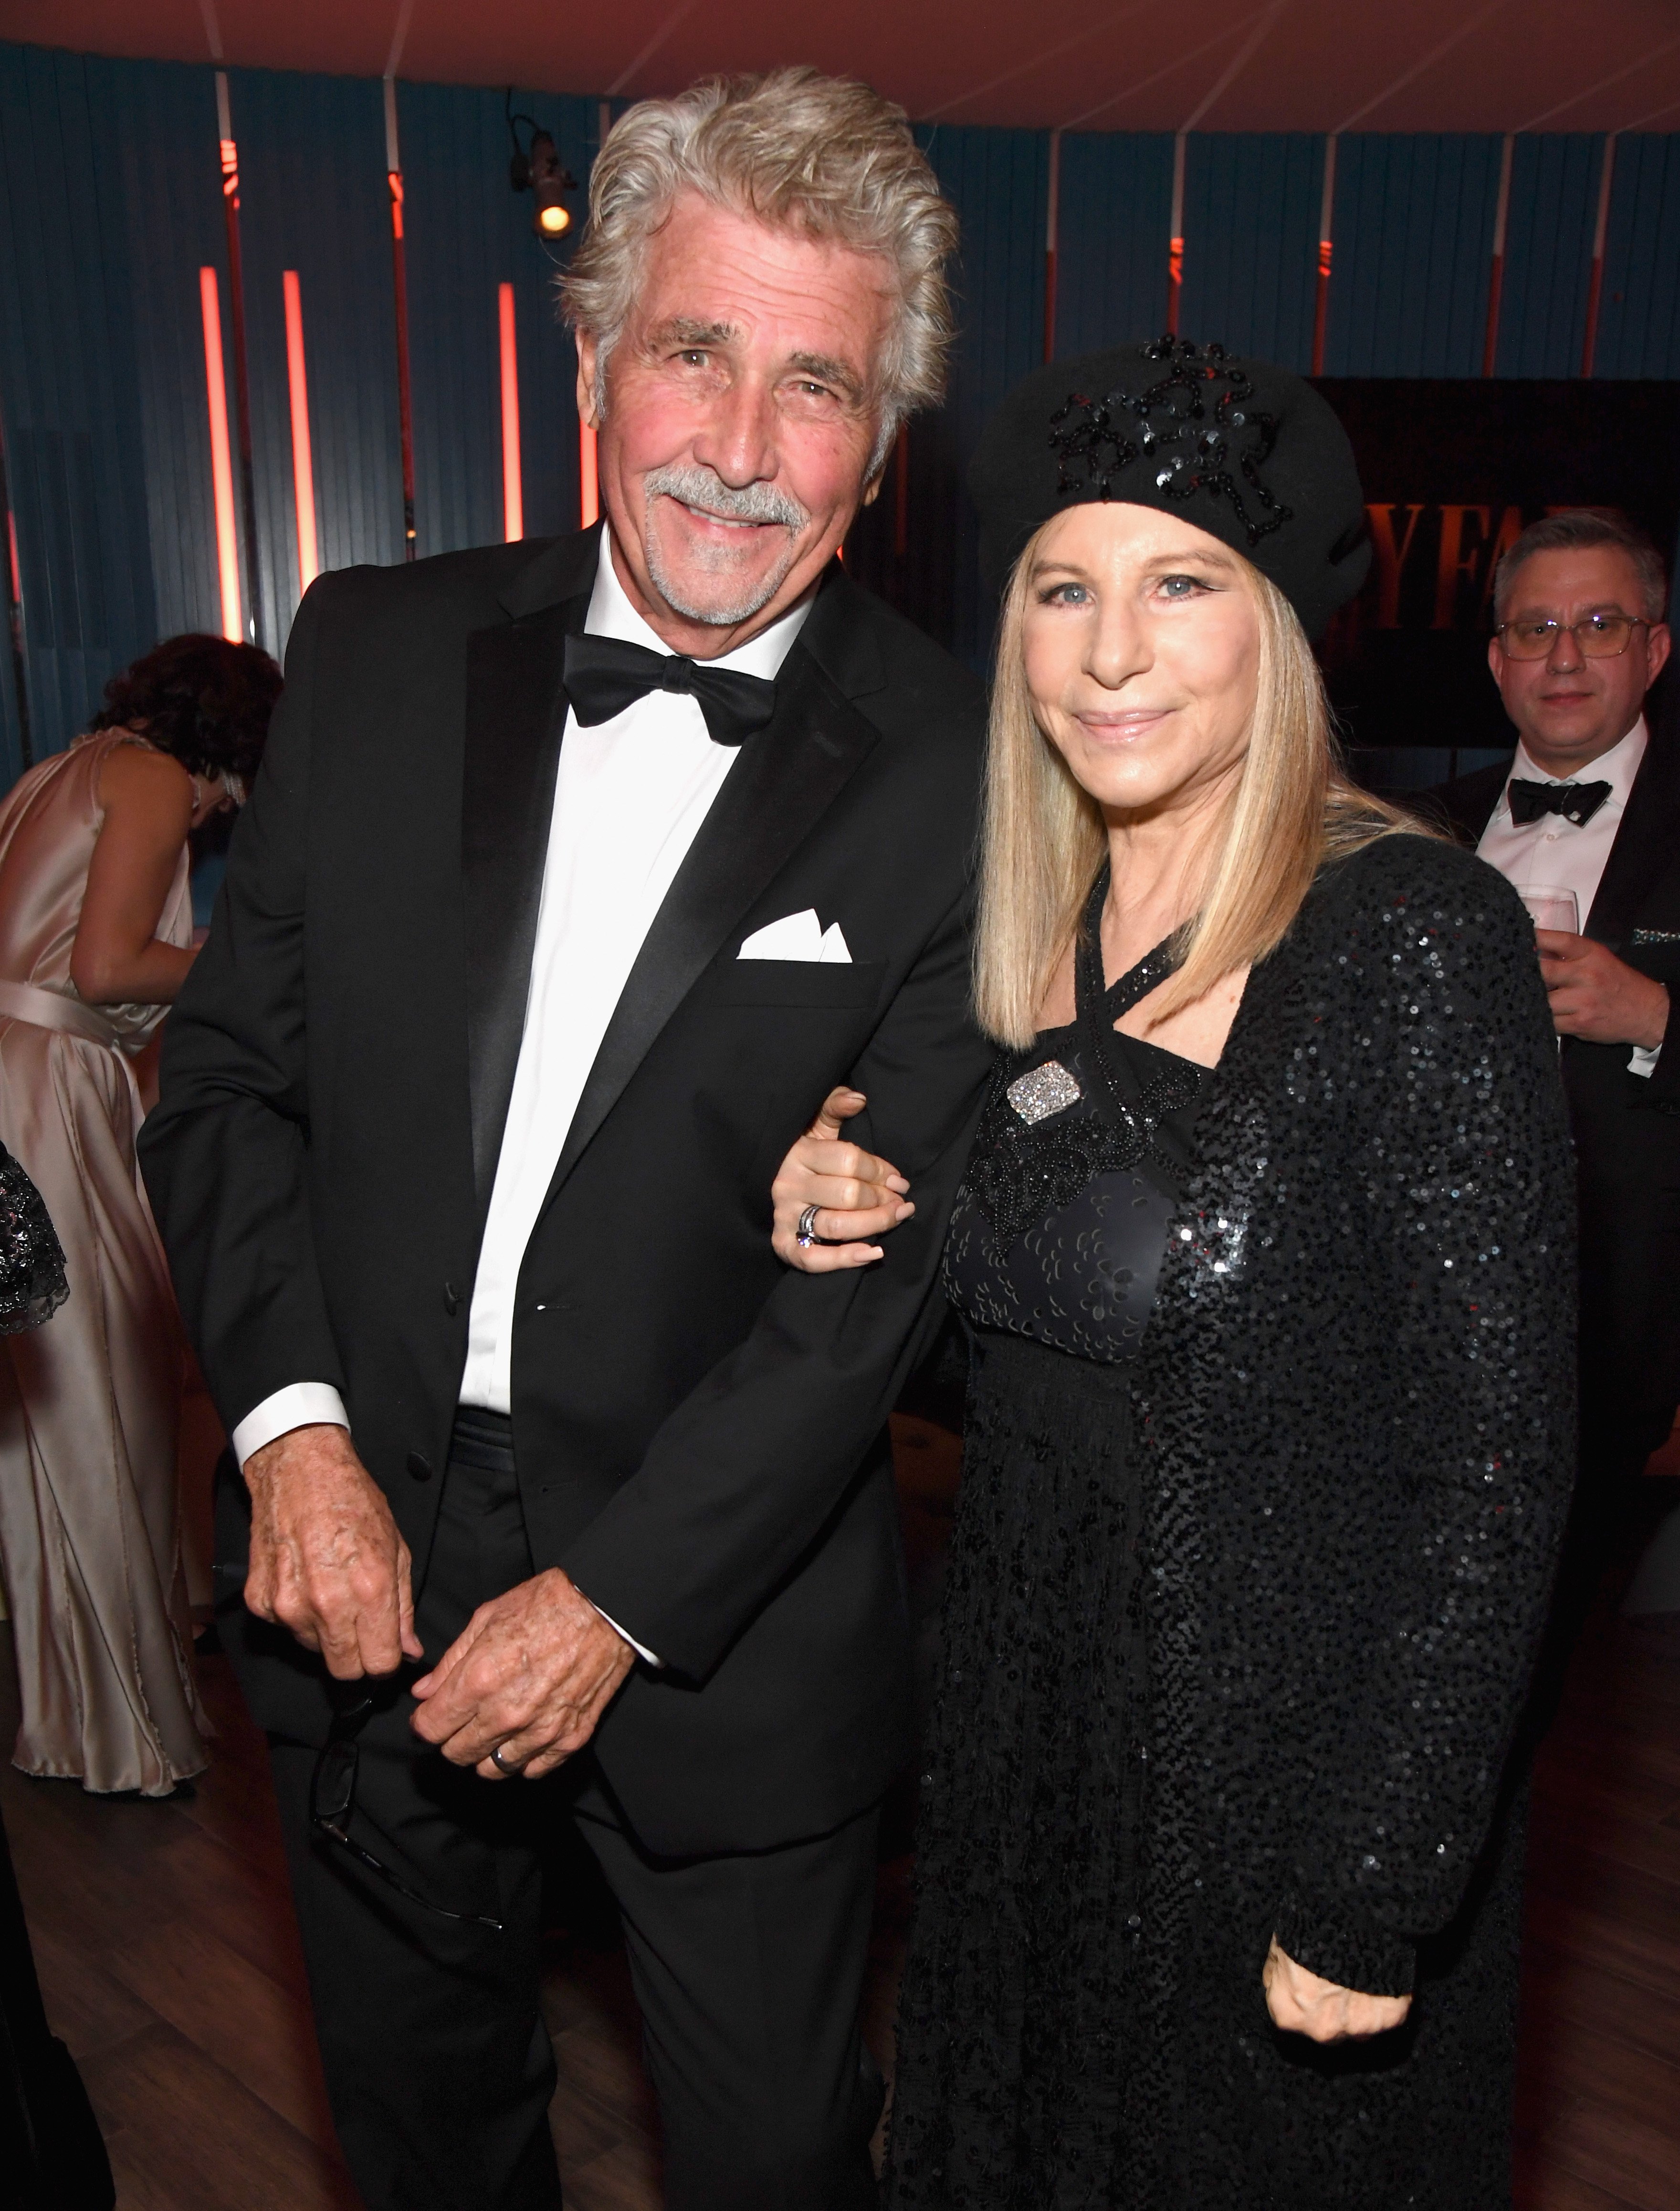 James Brolin and Barbra Streisand attend the 2019 Vanity Fair Oscar Party hosted by Radhika Jones on February 24, 2019, in Beverly Hills, California. | Source: Getty Images.